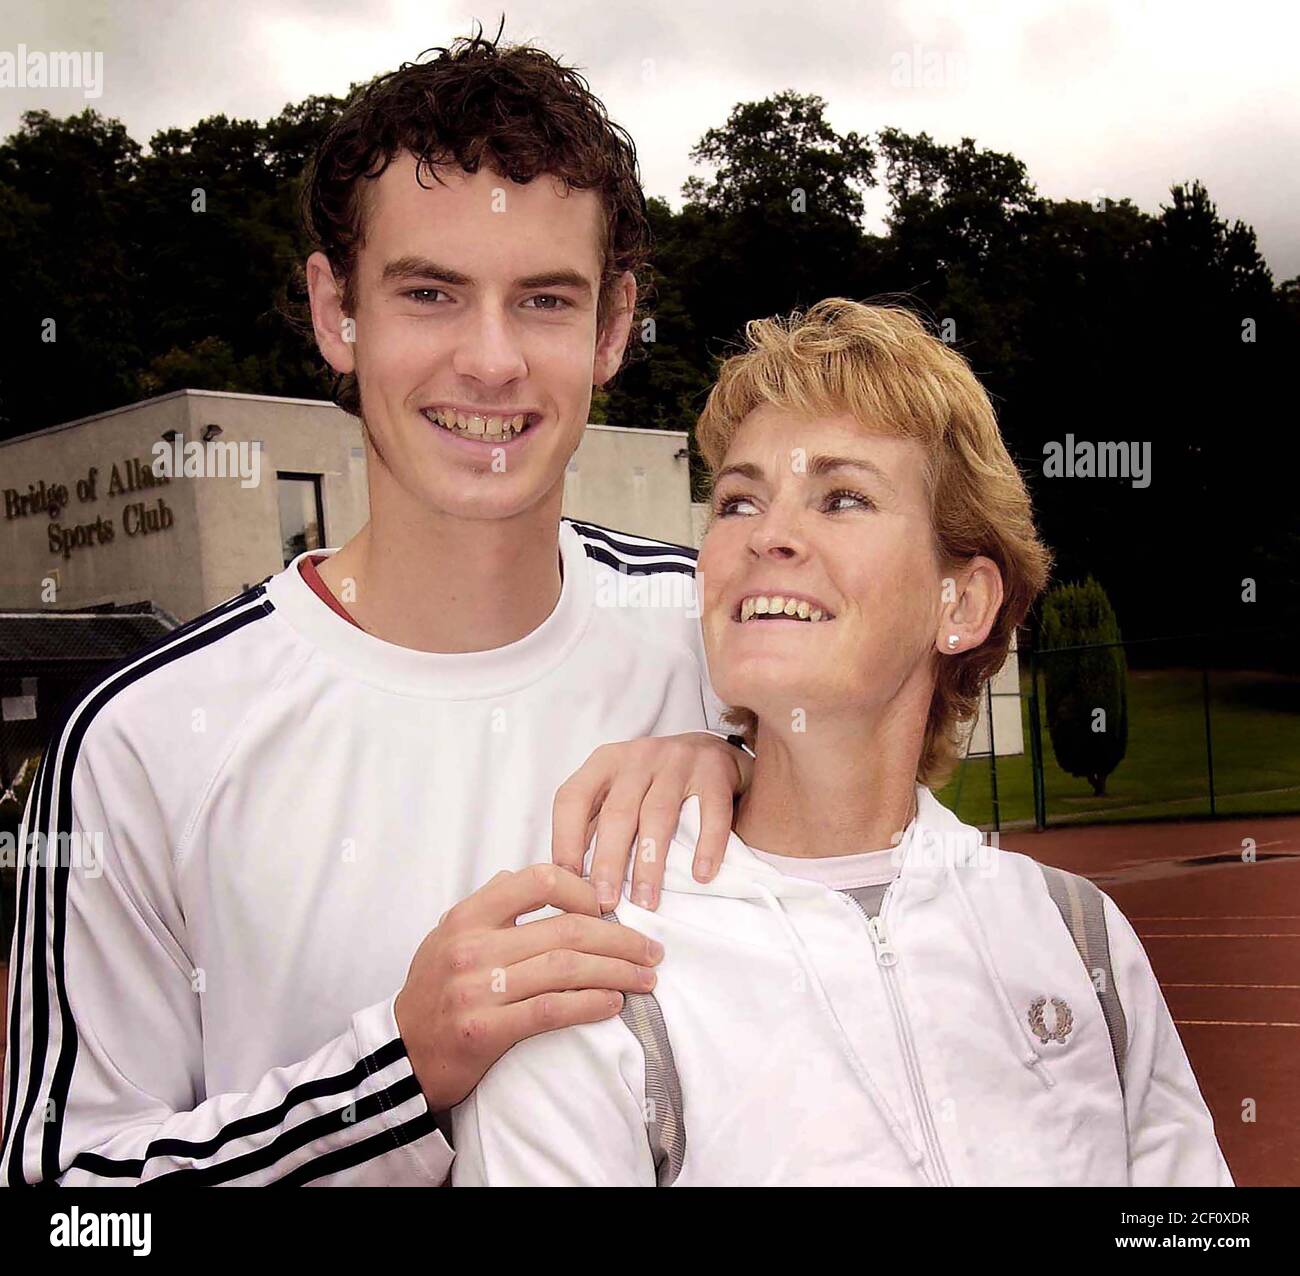 One of the world’s top tennis players at only 16, Andy Murray born 15th May 1987 seen here with mum Judy   pics taken in 2004 by Alan Peebles Stock Photo